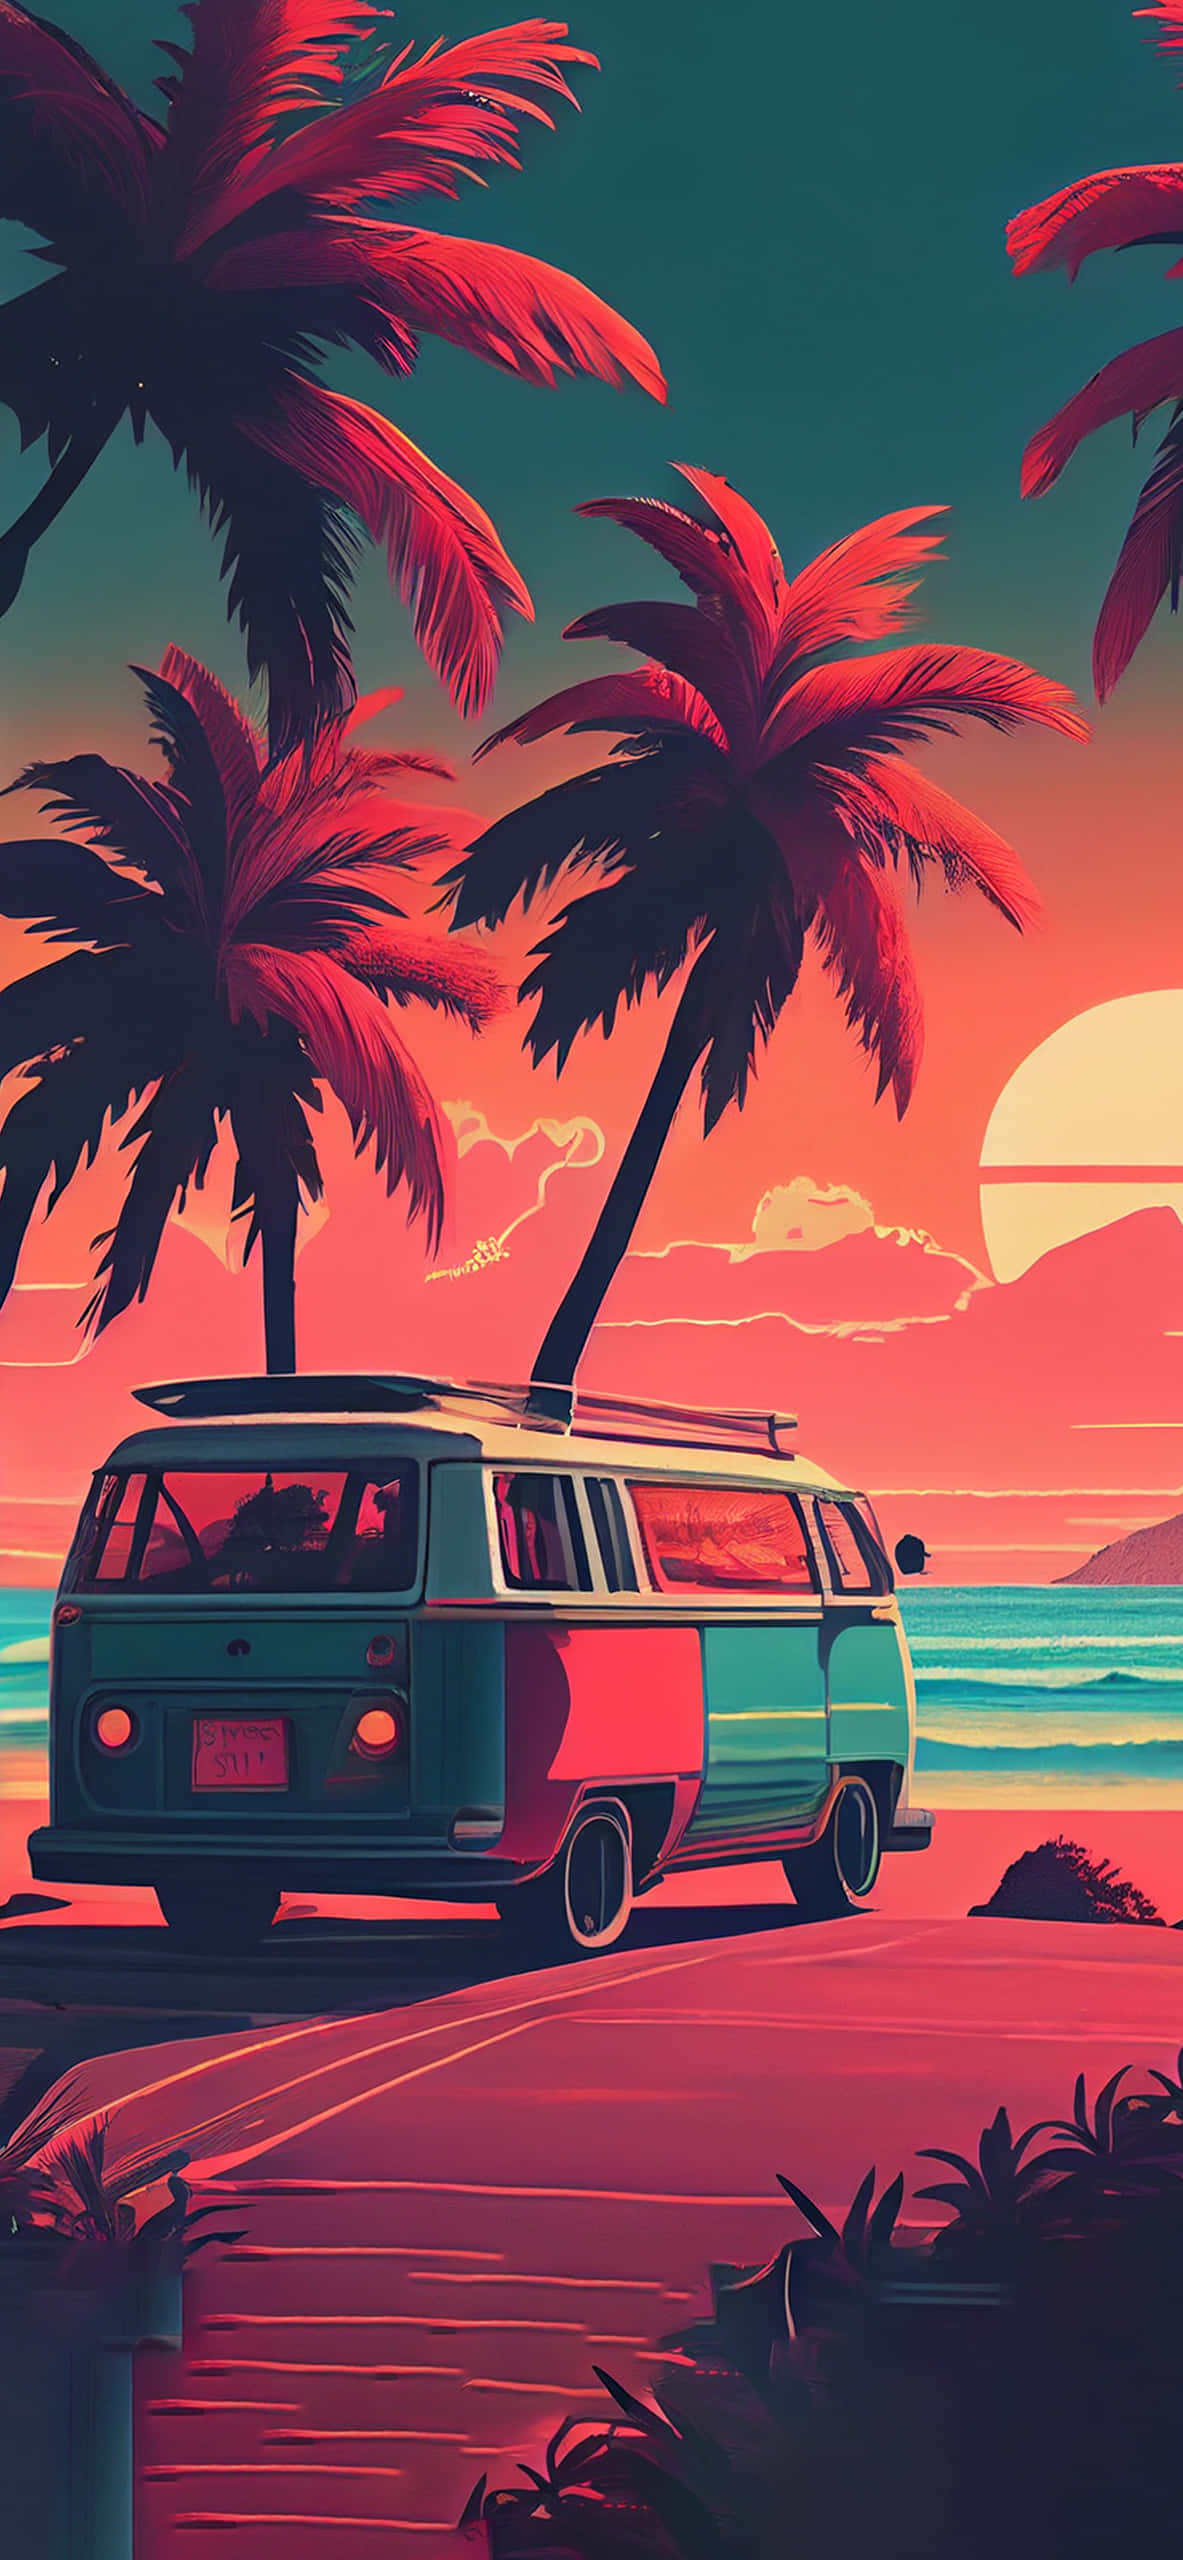 A Van On The Beach With Palm Trees